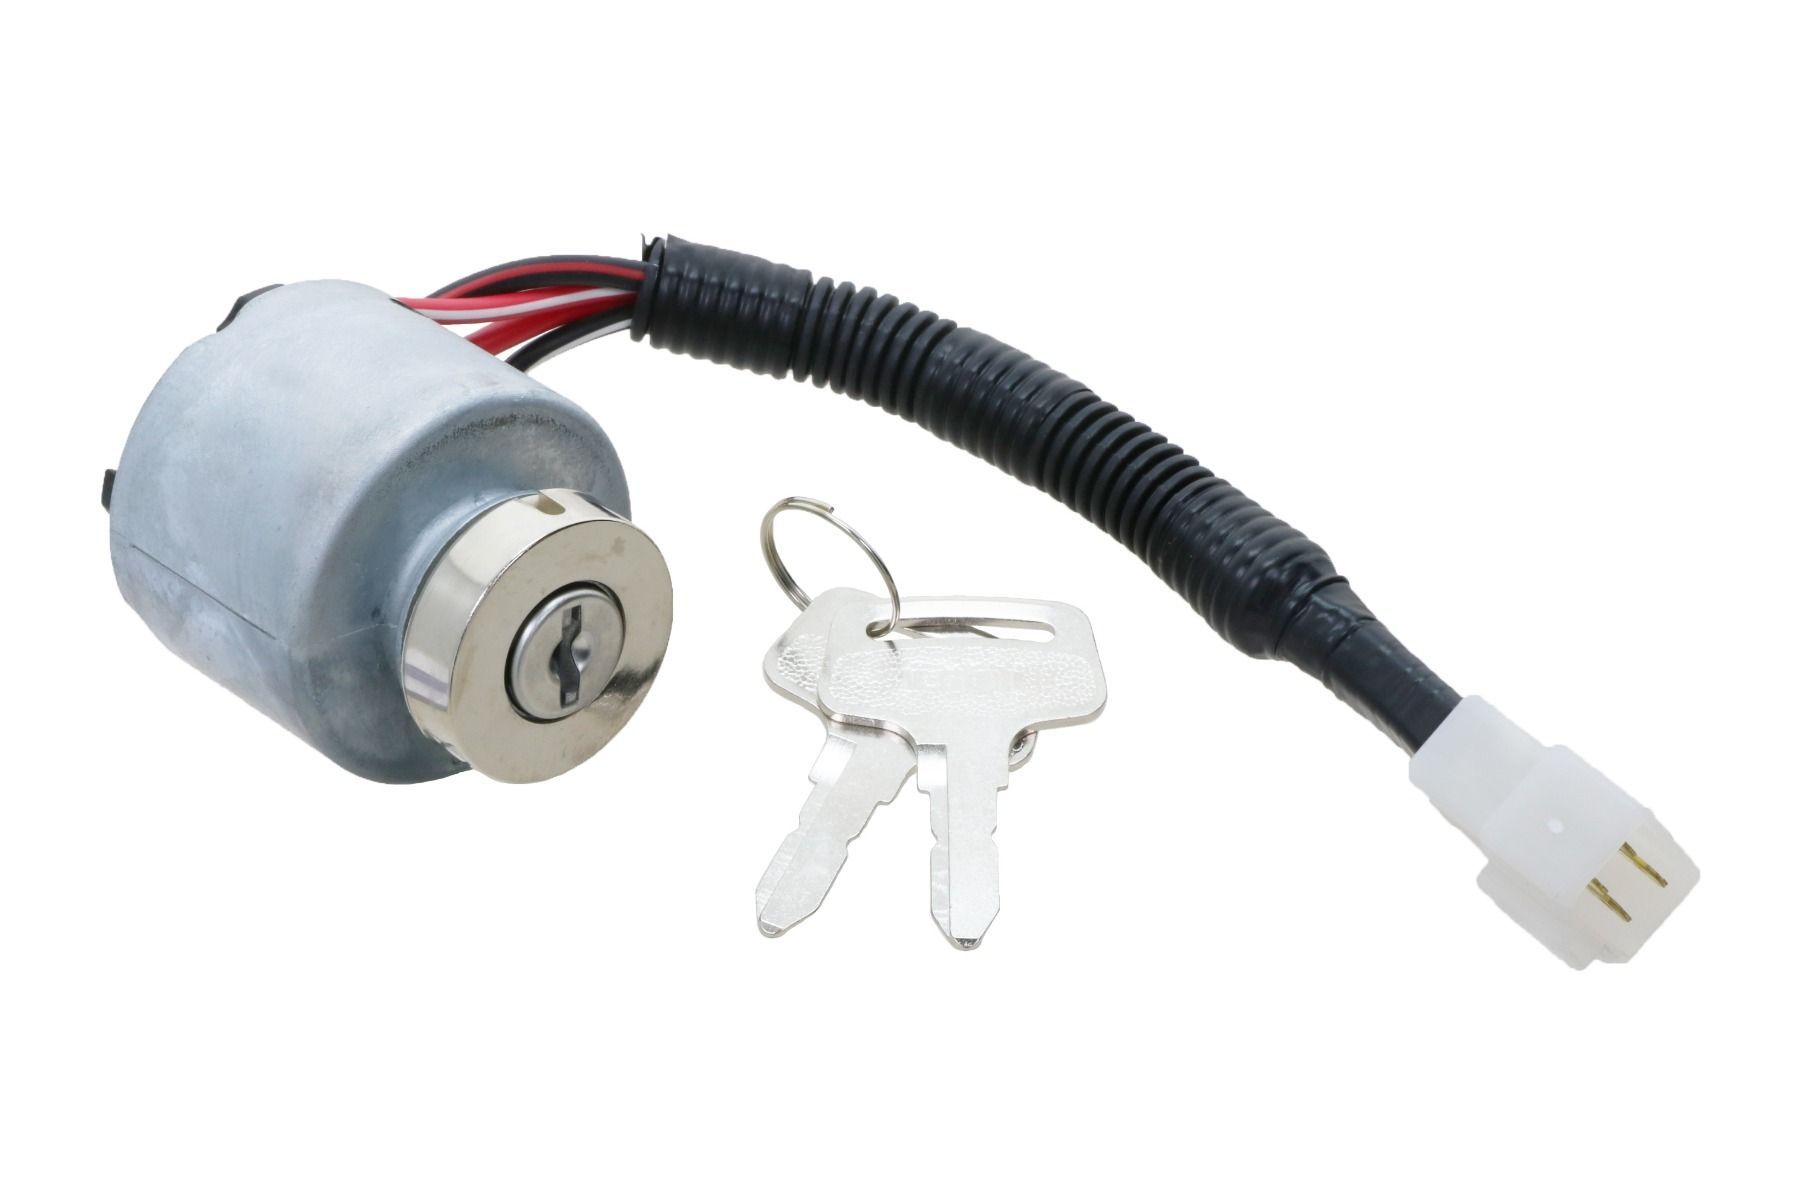 Weelparz 3741059110 Ignition Starter Switch With 2 Key 37410-59110 Compatible with Kubota B1750D B1750E B1750HST B2150D B1550E 